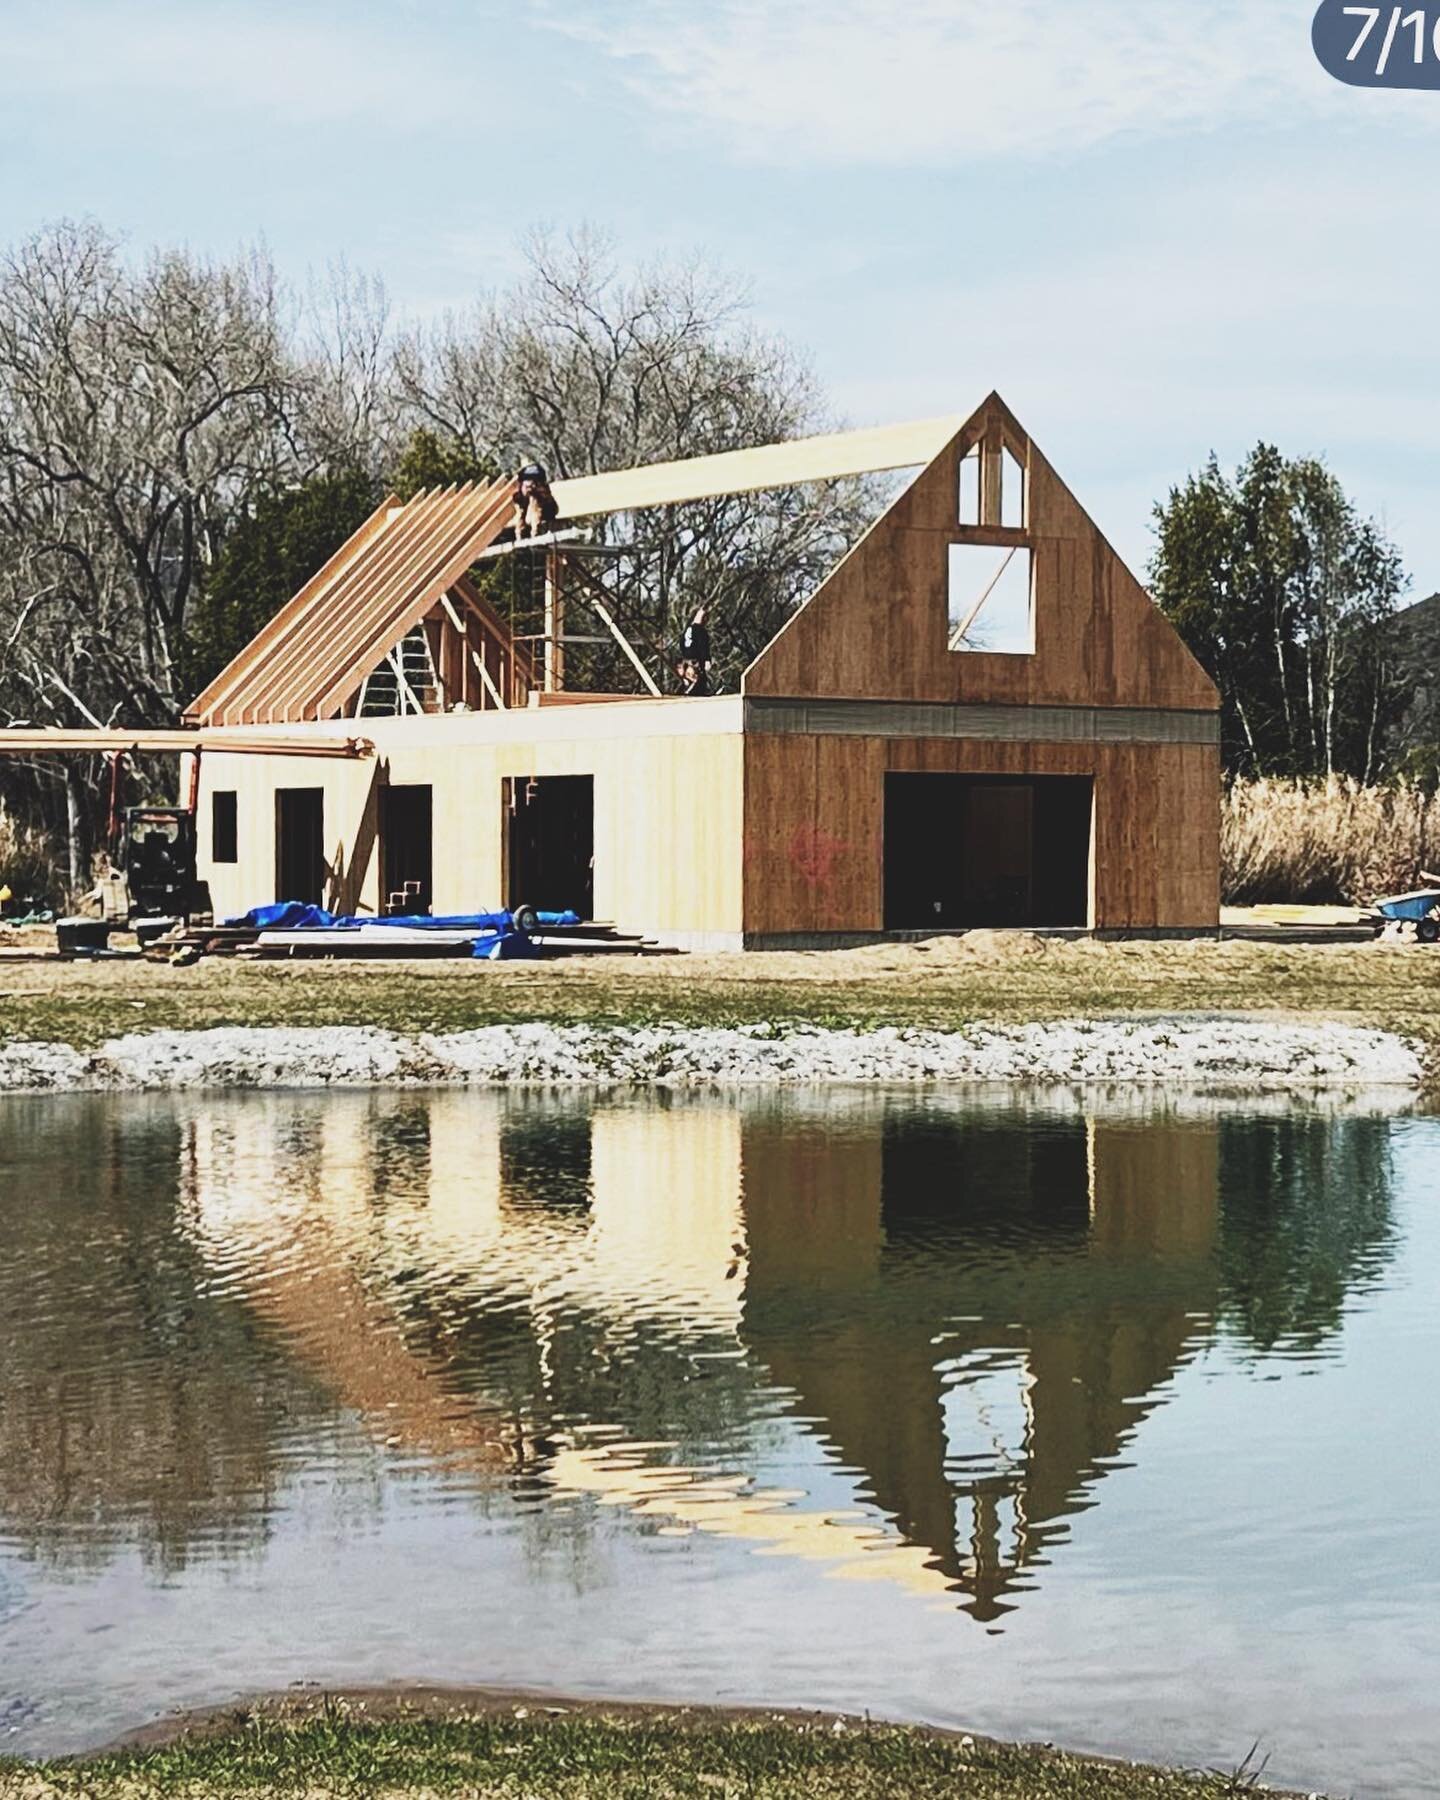 First came the oak grove, second came the lake, third comes the hosting barn the frosting on the cake.  We are so proud to be part of this adventure!#sterryarchitecture #clos_racines #trufflefarm #campolandscape #lakecountyca